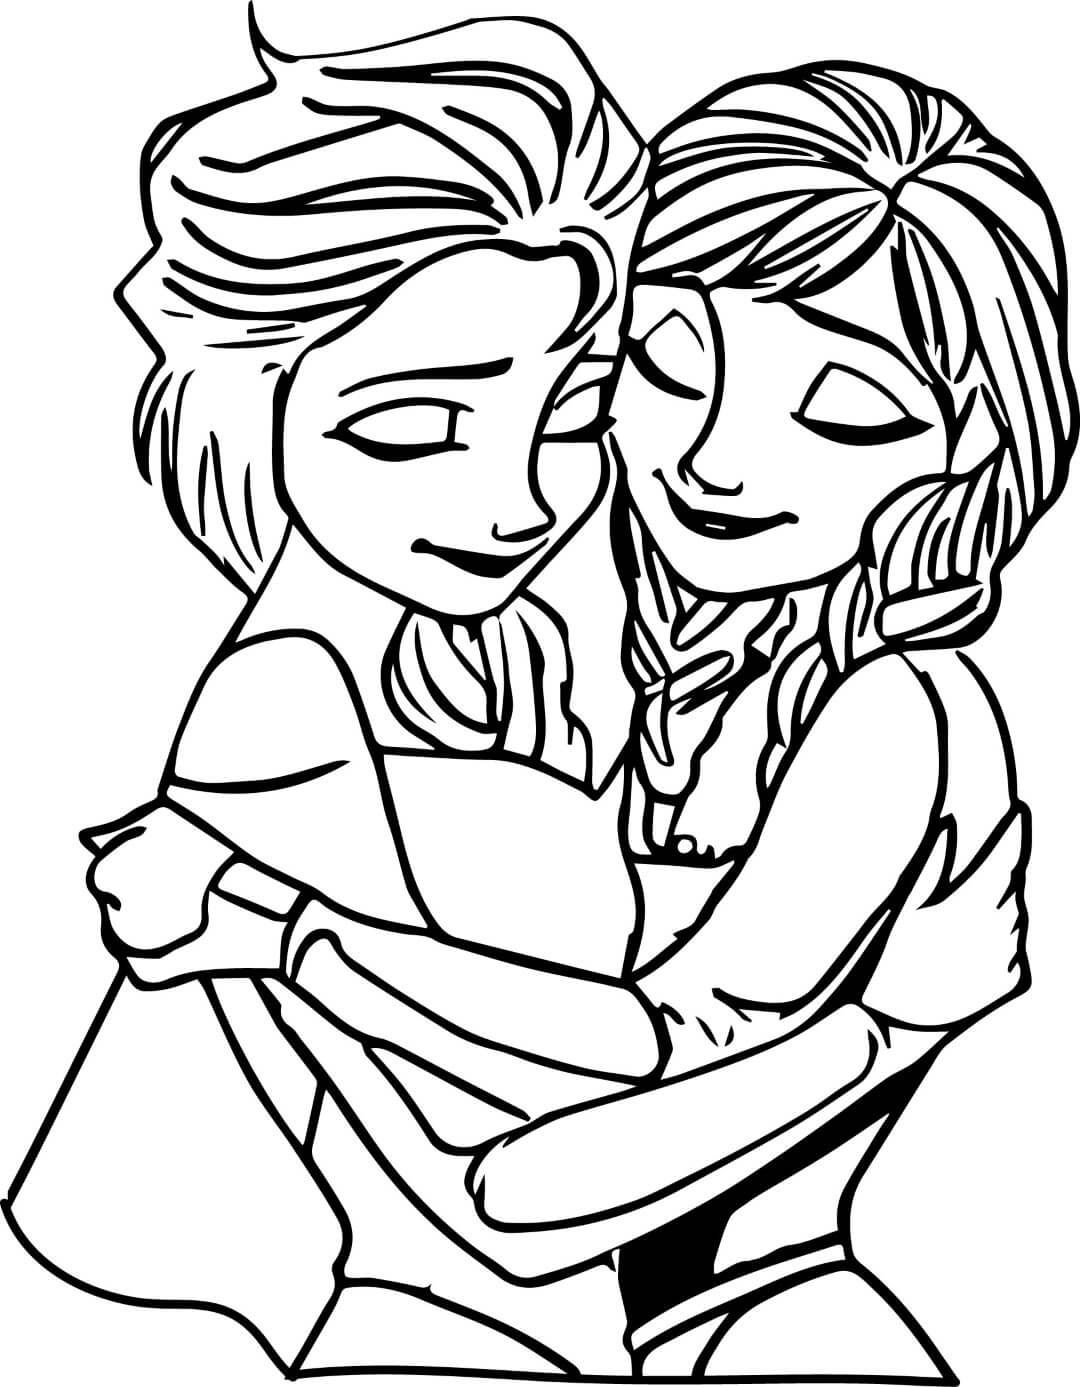 Elsa and Anna Line Art to Color